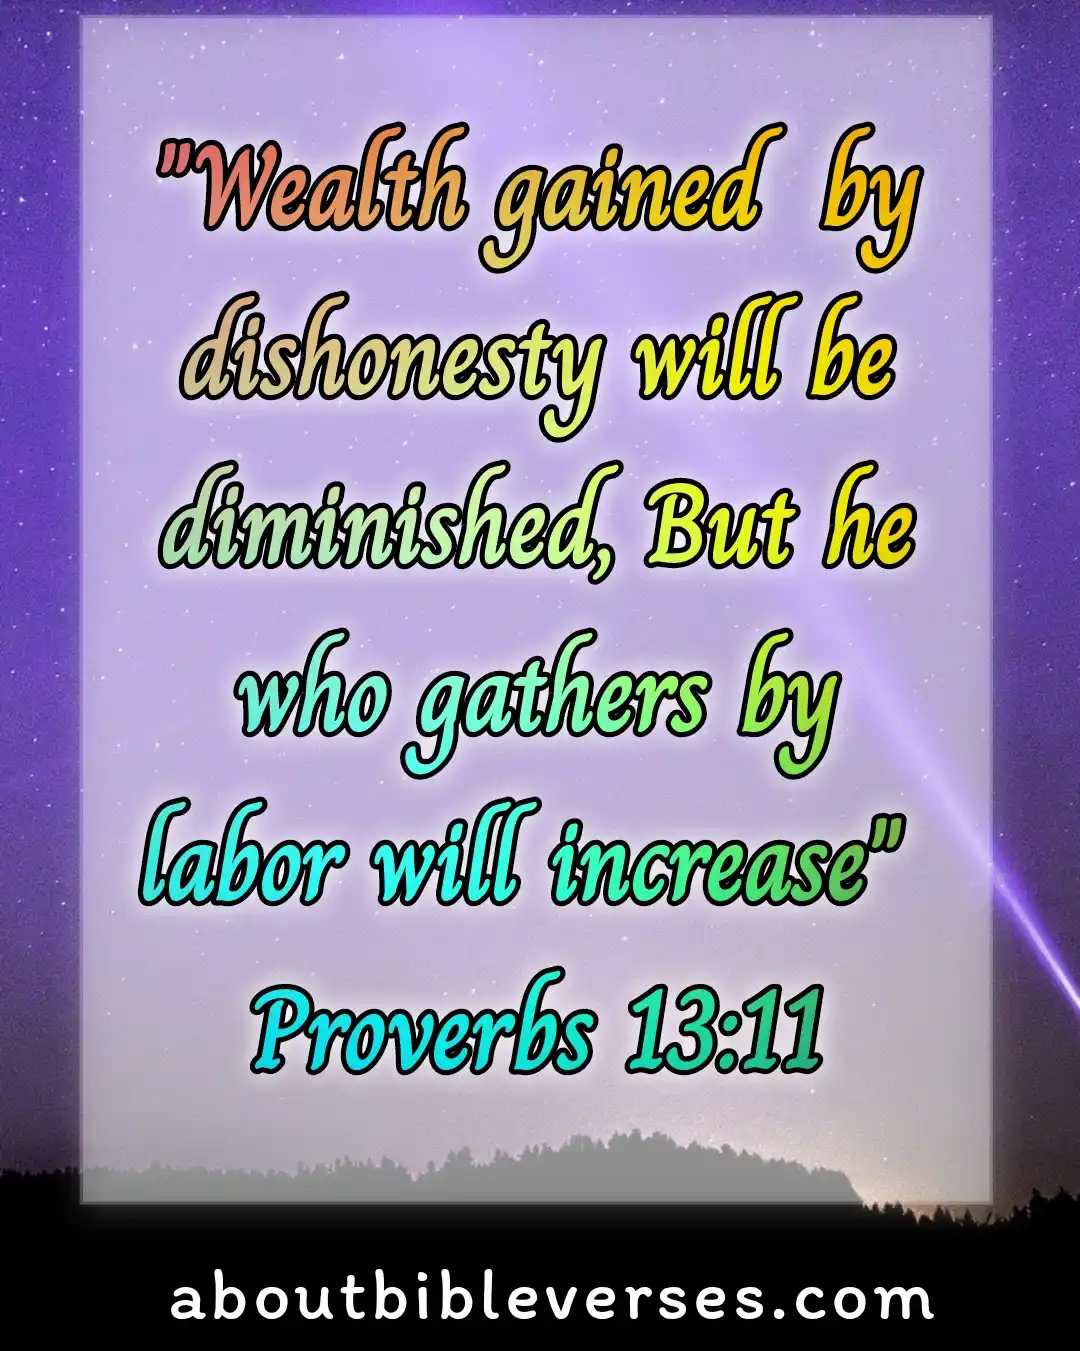 Bible Verses About Wealth And Prosperity (Proverbs 13:11)